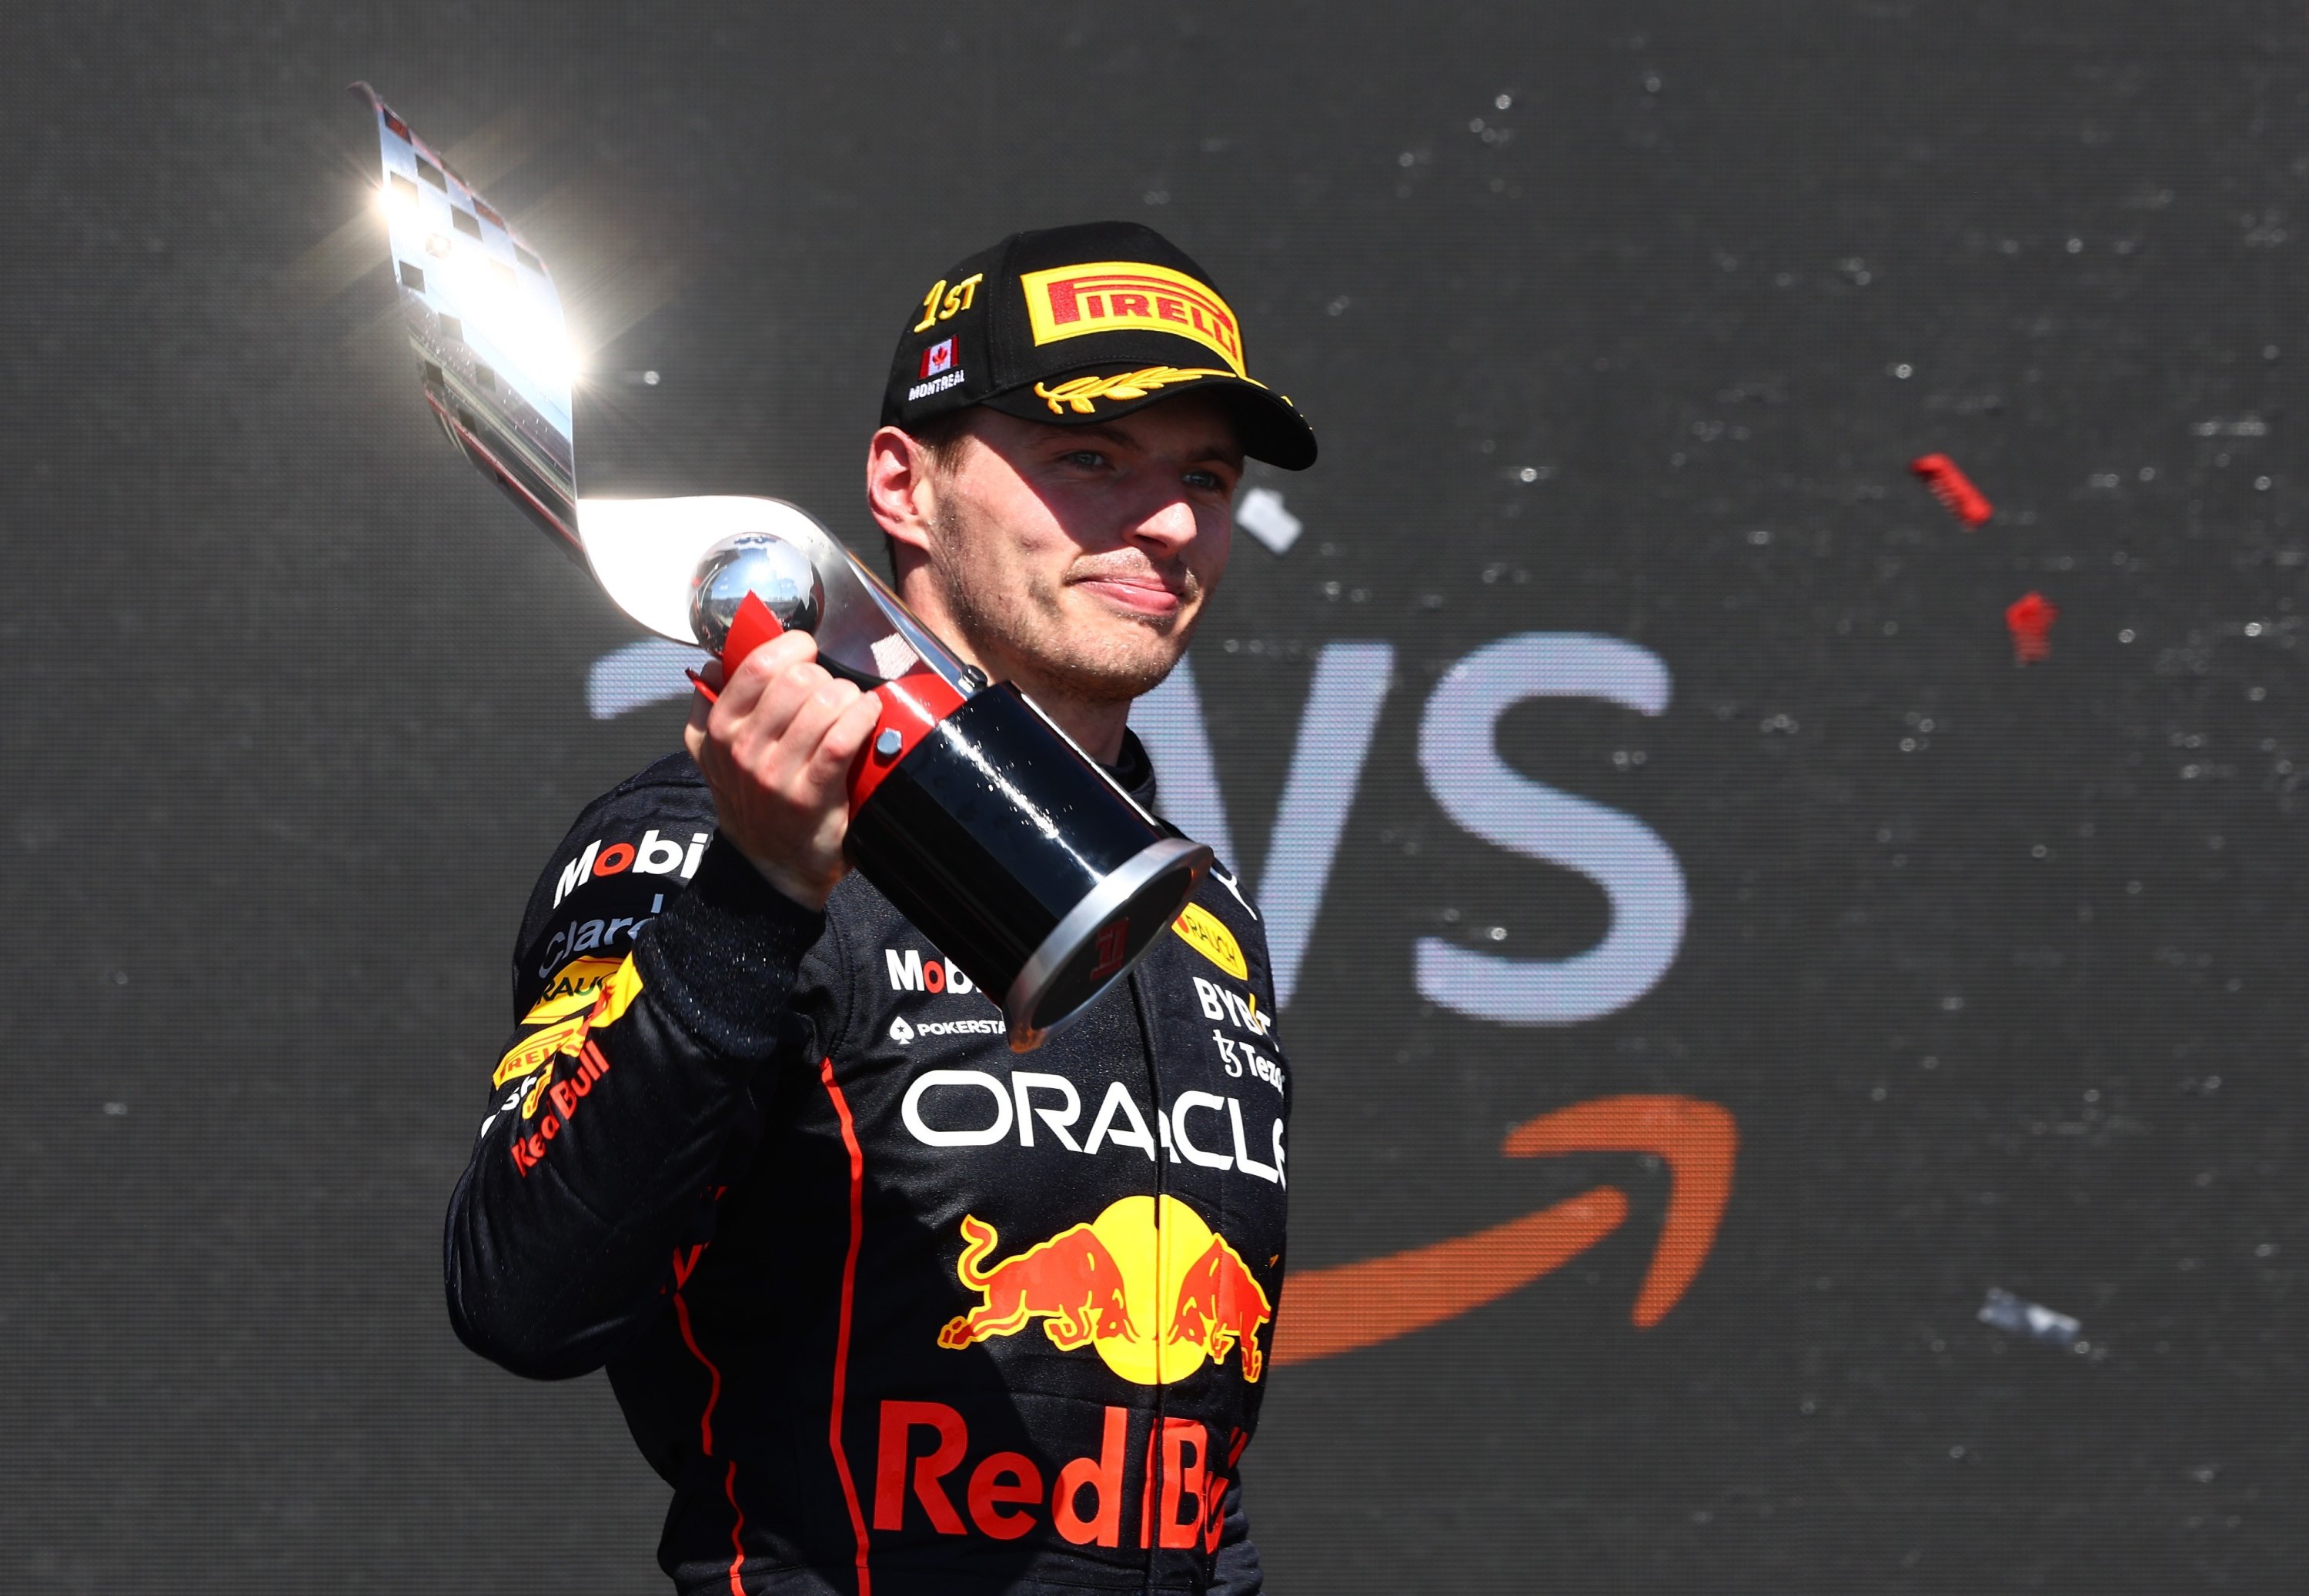 F1 Canadian GP:  Max Verstappen holds off Carlos Sainz to extend championship lead, Lewis Hamilton took home his second podium finish